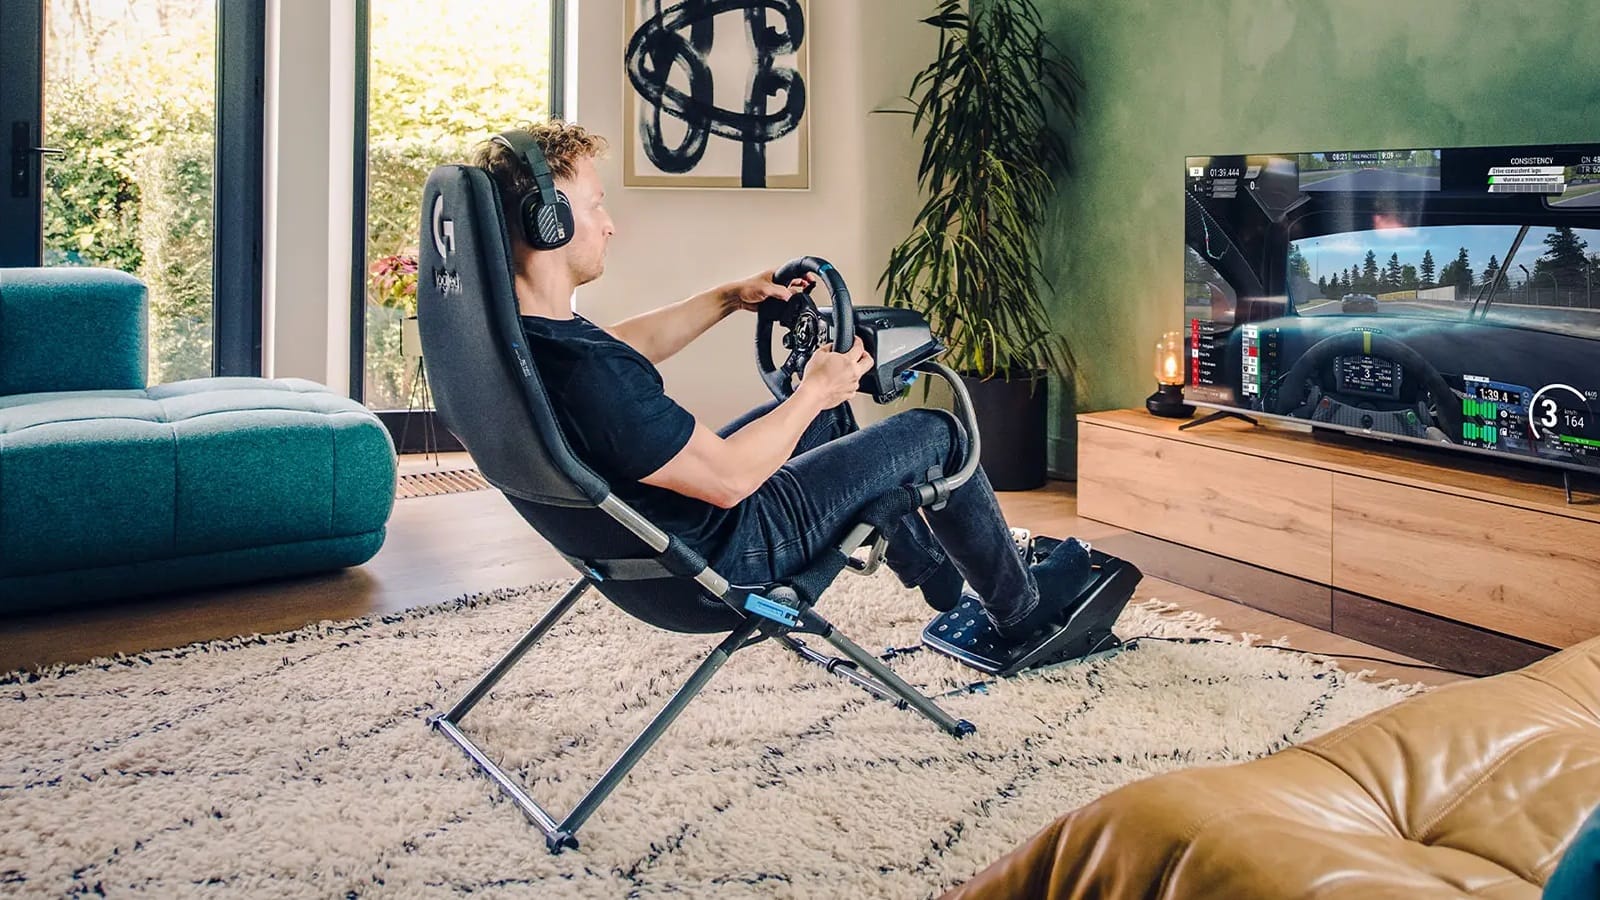 SMALL SPACE RACER!  Playseat Challenge X Logitech G Edition